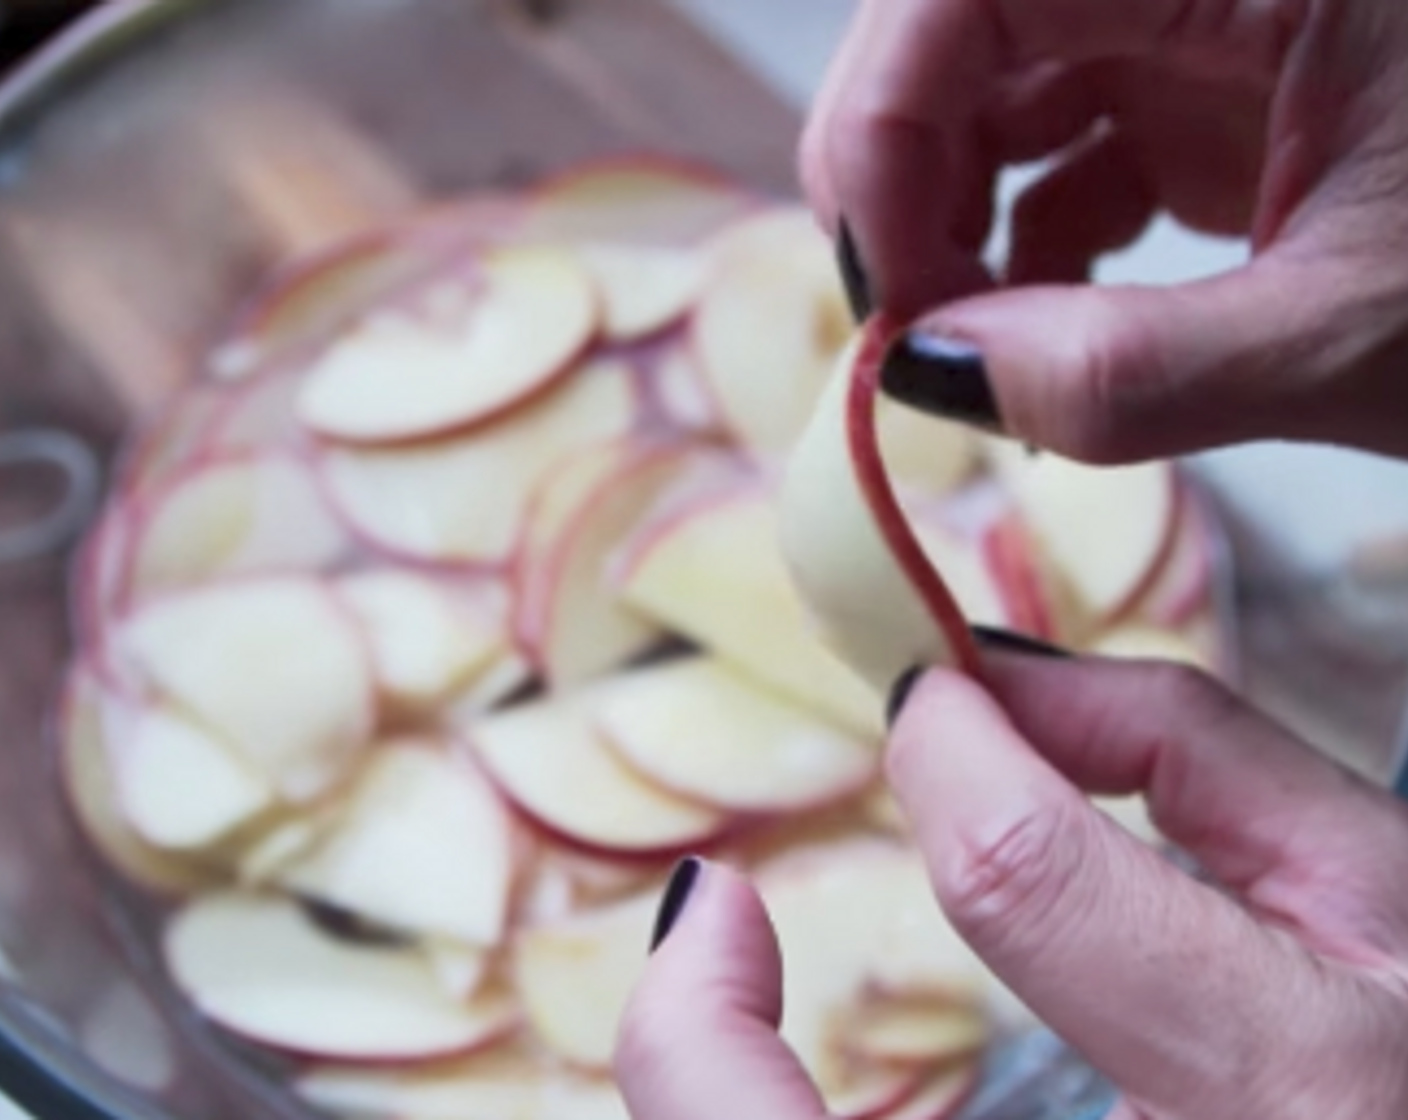 step 4 Place the sliced apples into the bowl of lemon water. Microwave for about 3-4 minutes until the apples are pliable, soft but not mushy.